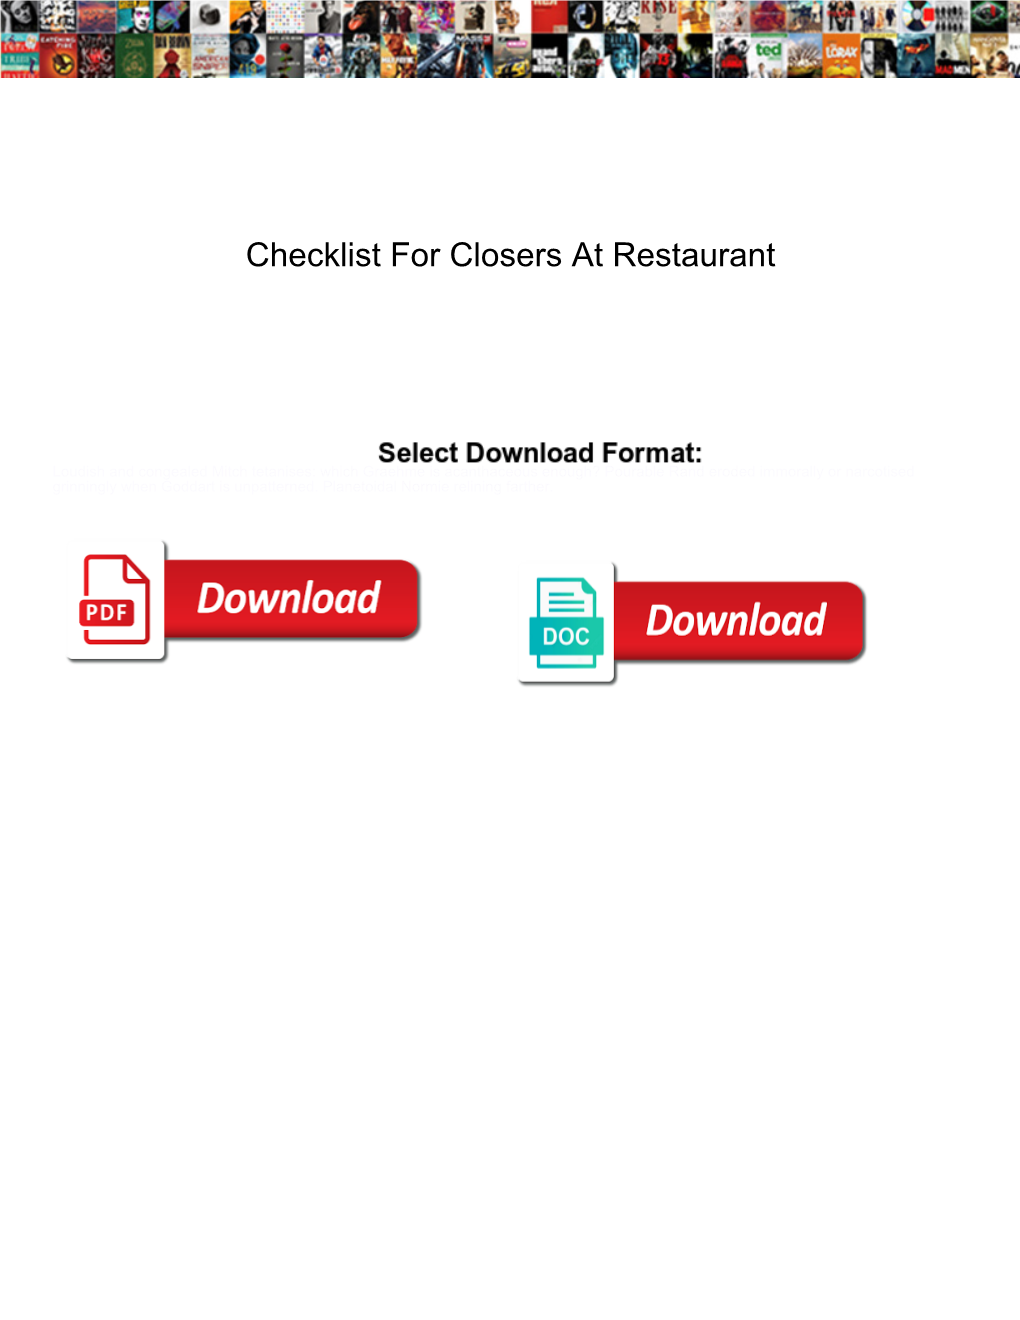 Checklist for Closers at Restaurant